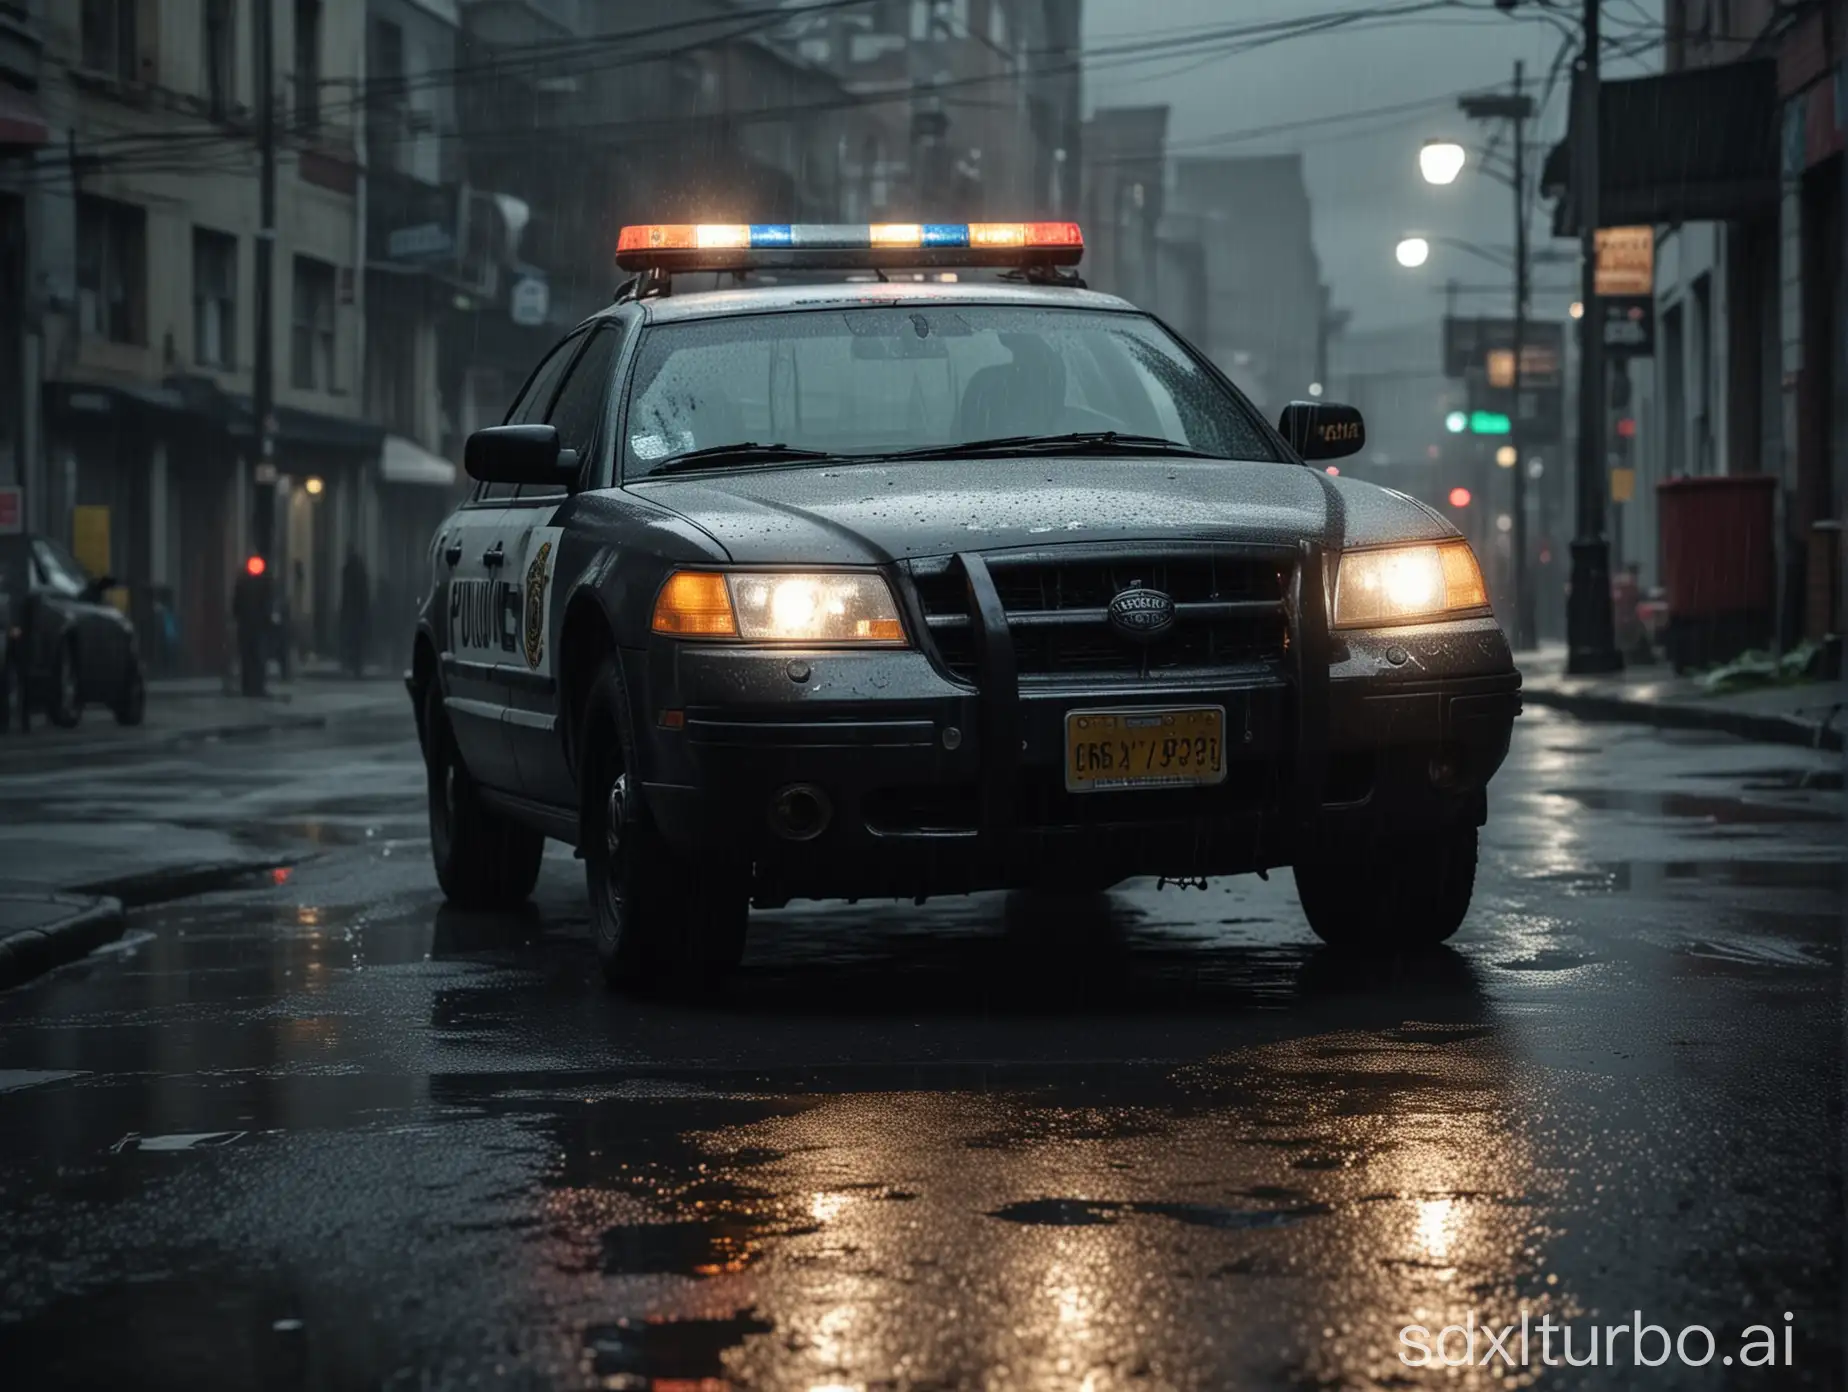 Close up on police car from the side in Dirty street in hood, rain, cinematic, dark ambiance, GTA style